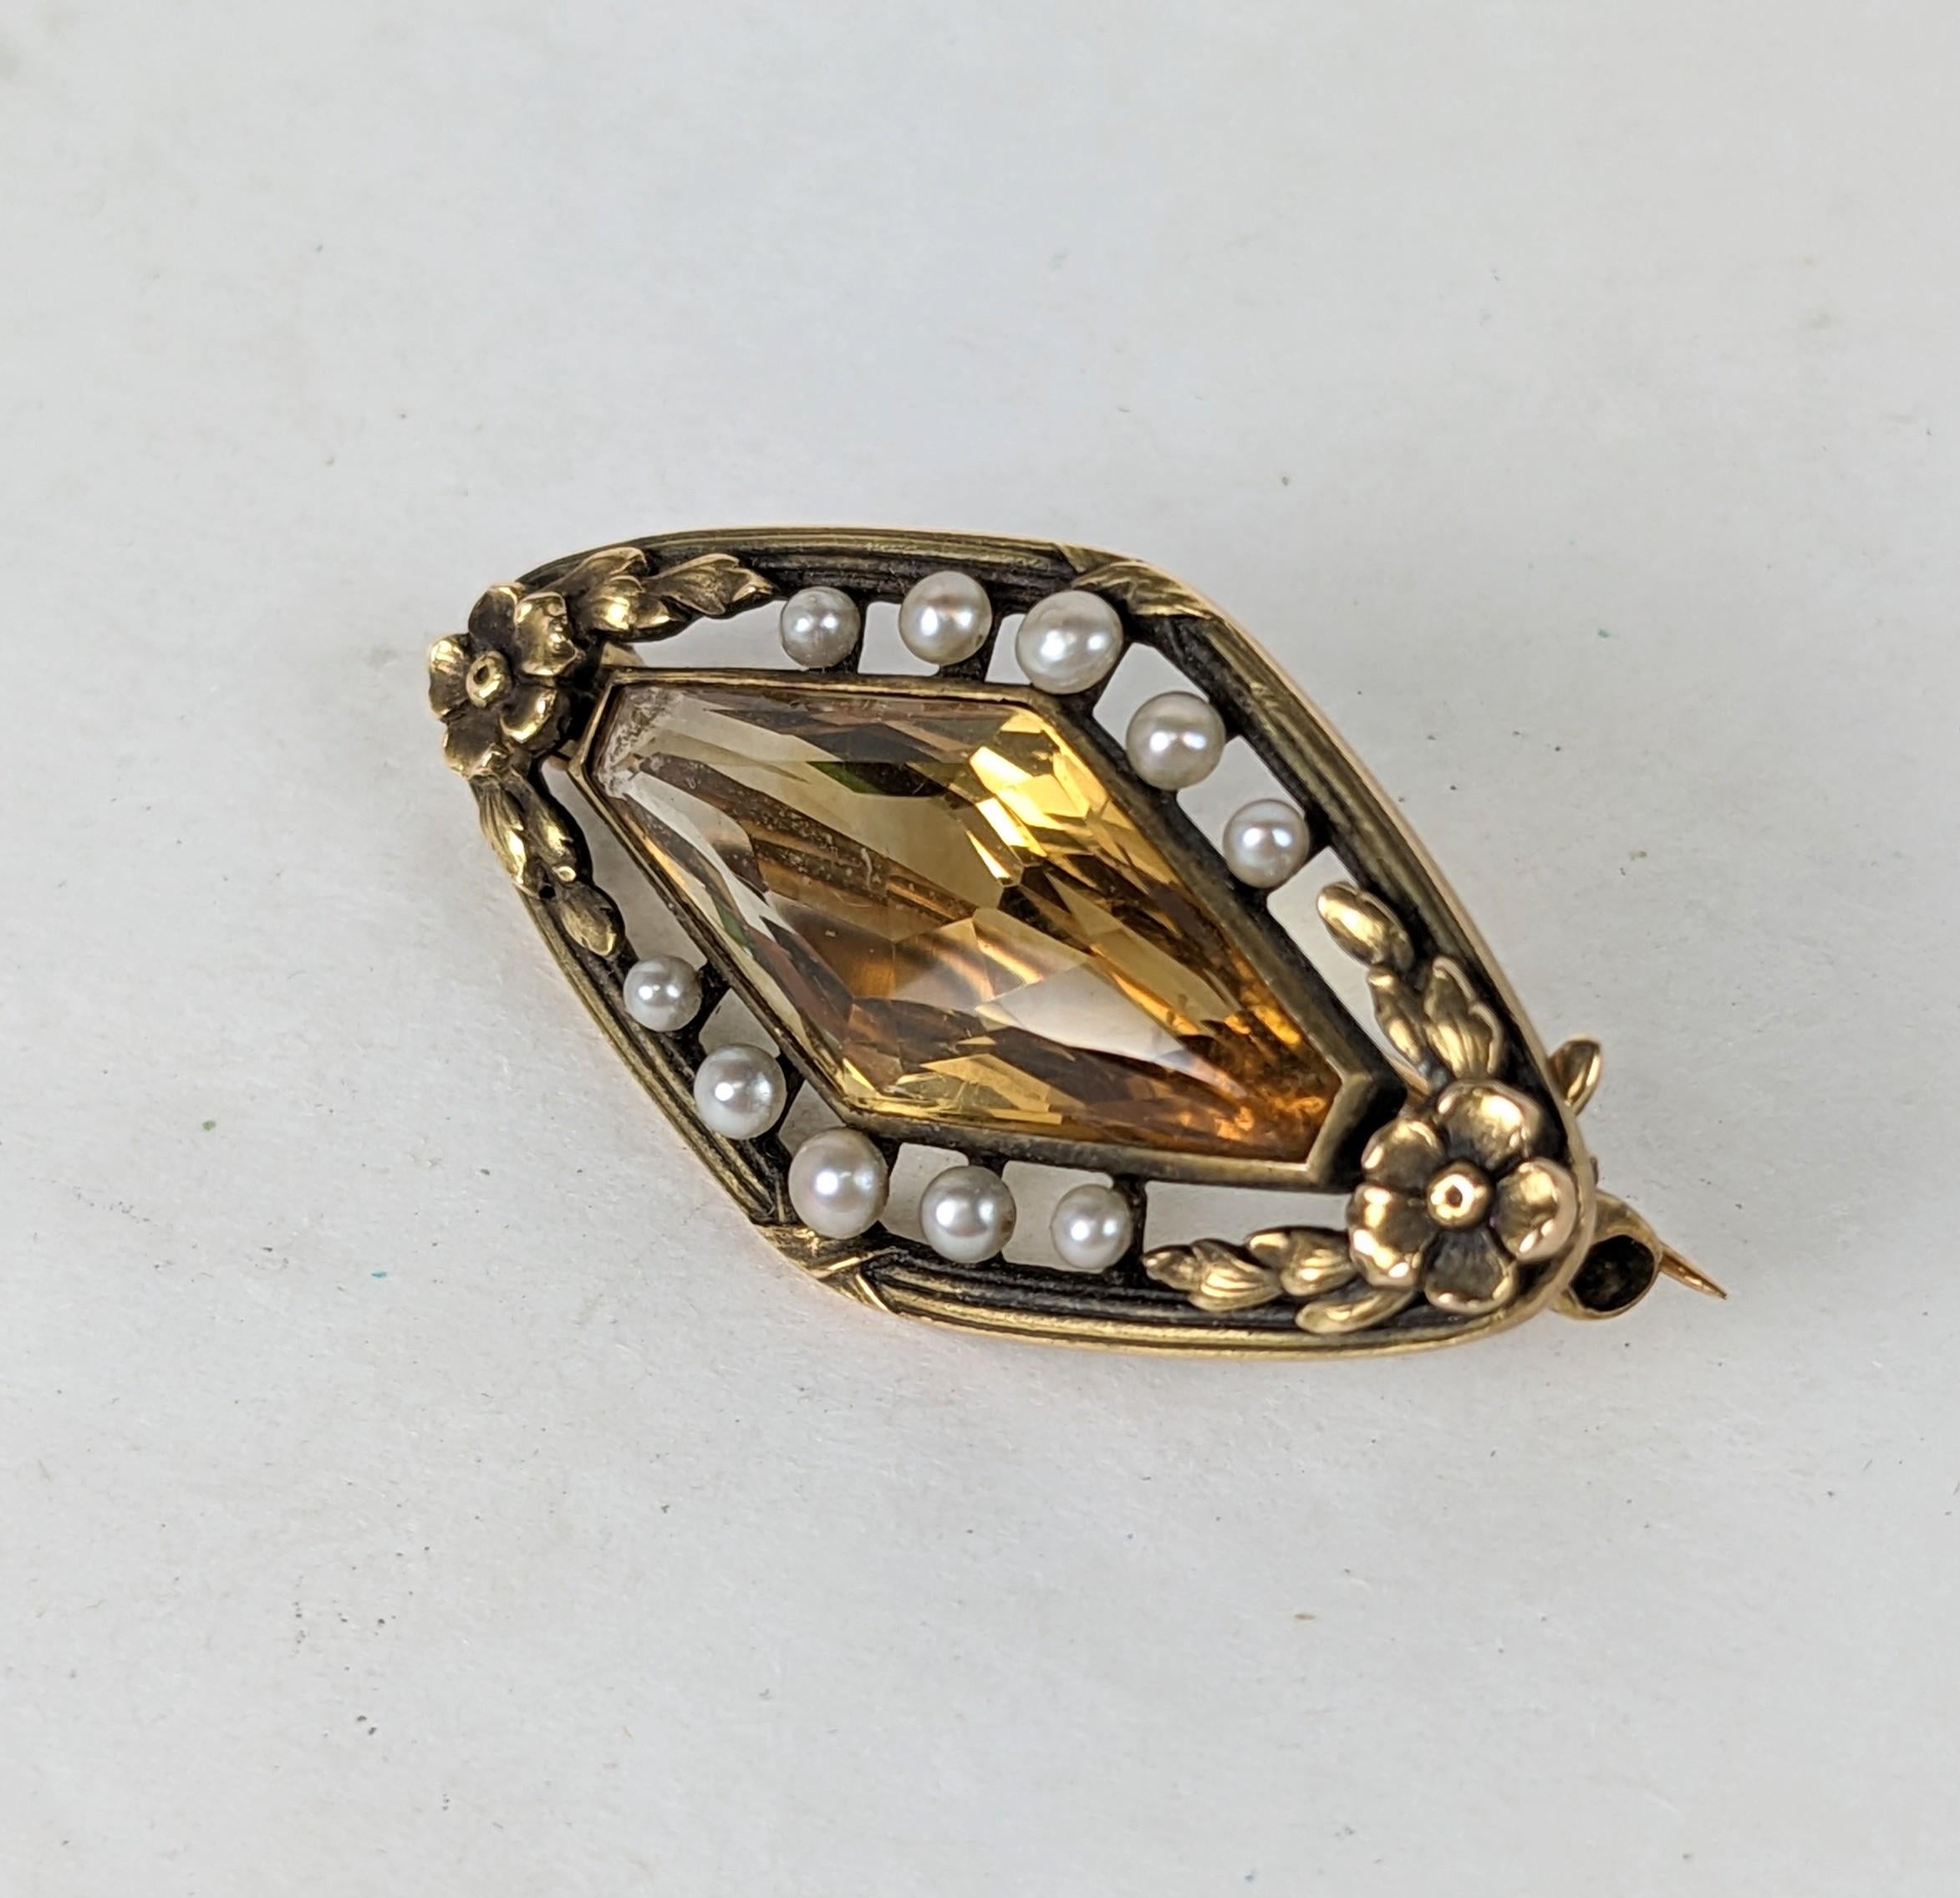 Lovely Edwardian Citrine, Pearl and 14k Green Gold Brooch from the early 1900's. A fancy cut citrine is framed by graduated natural pearls and a Neoclassical surround. 
NJ Maker, Signed 1.25